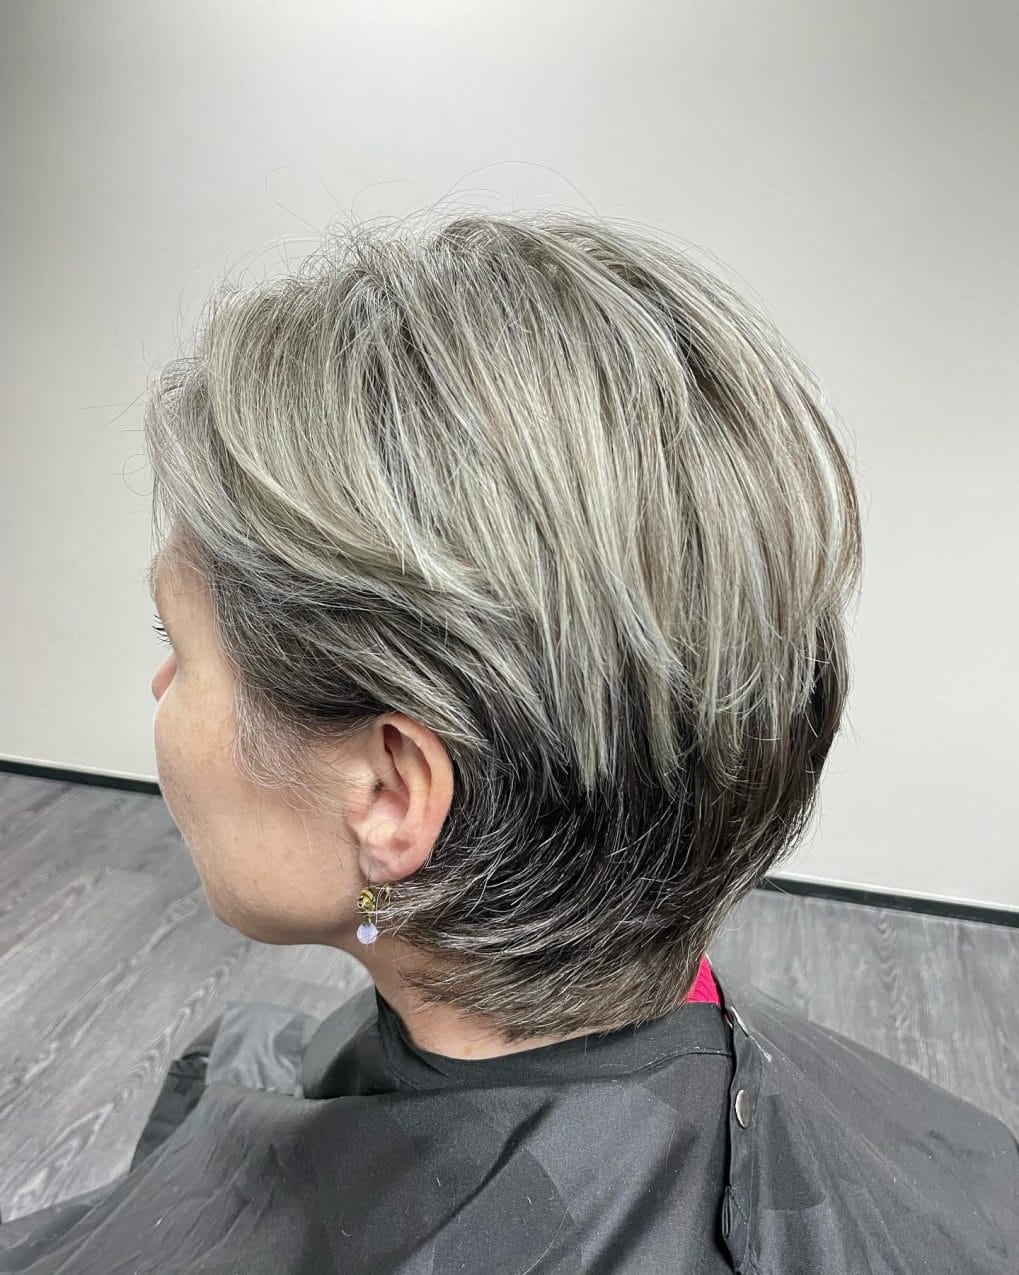 Modern voluminous pixie bob in silver and ash blonde with forward-swept hair framing the face